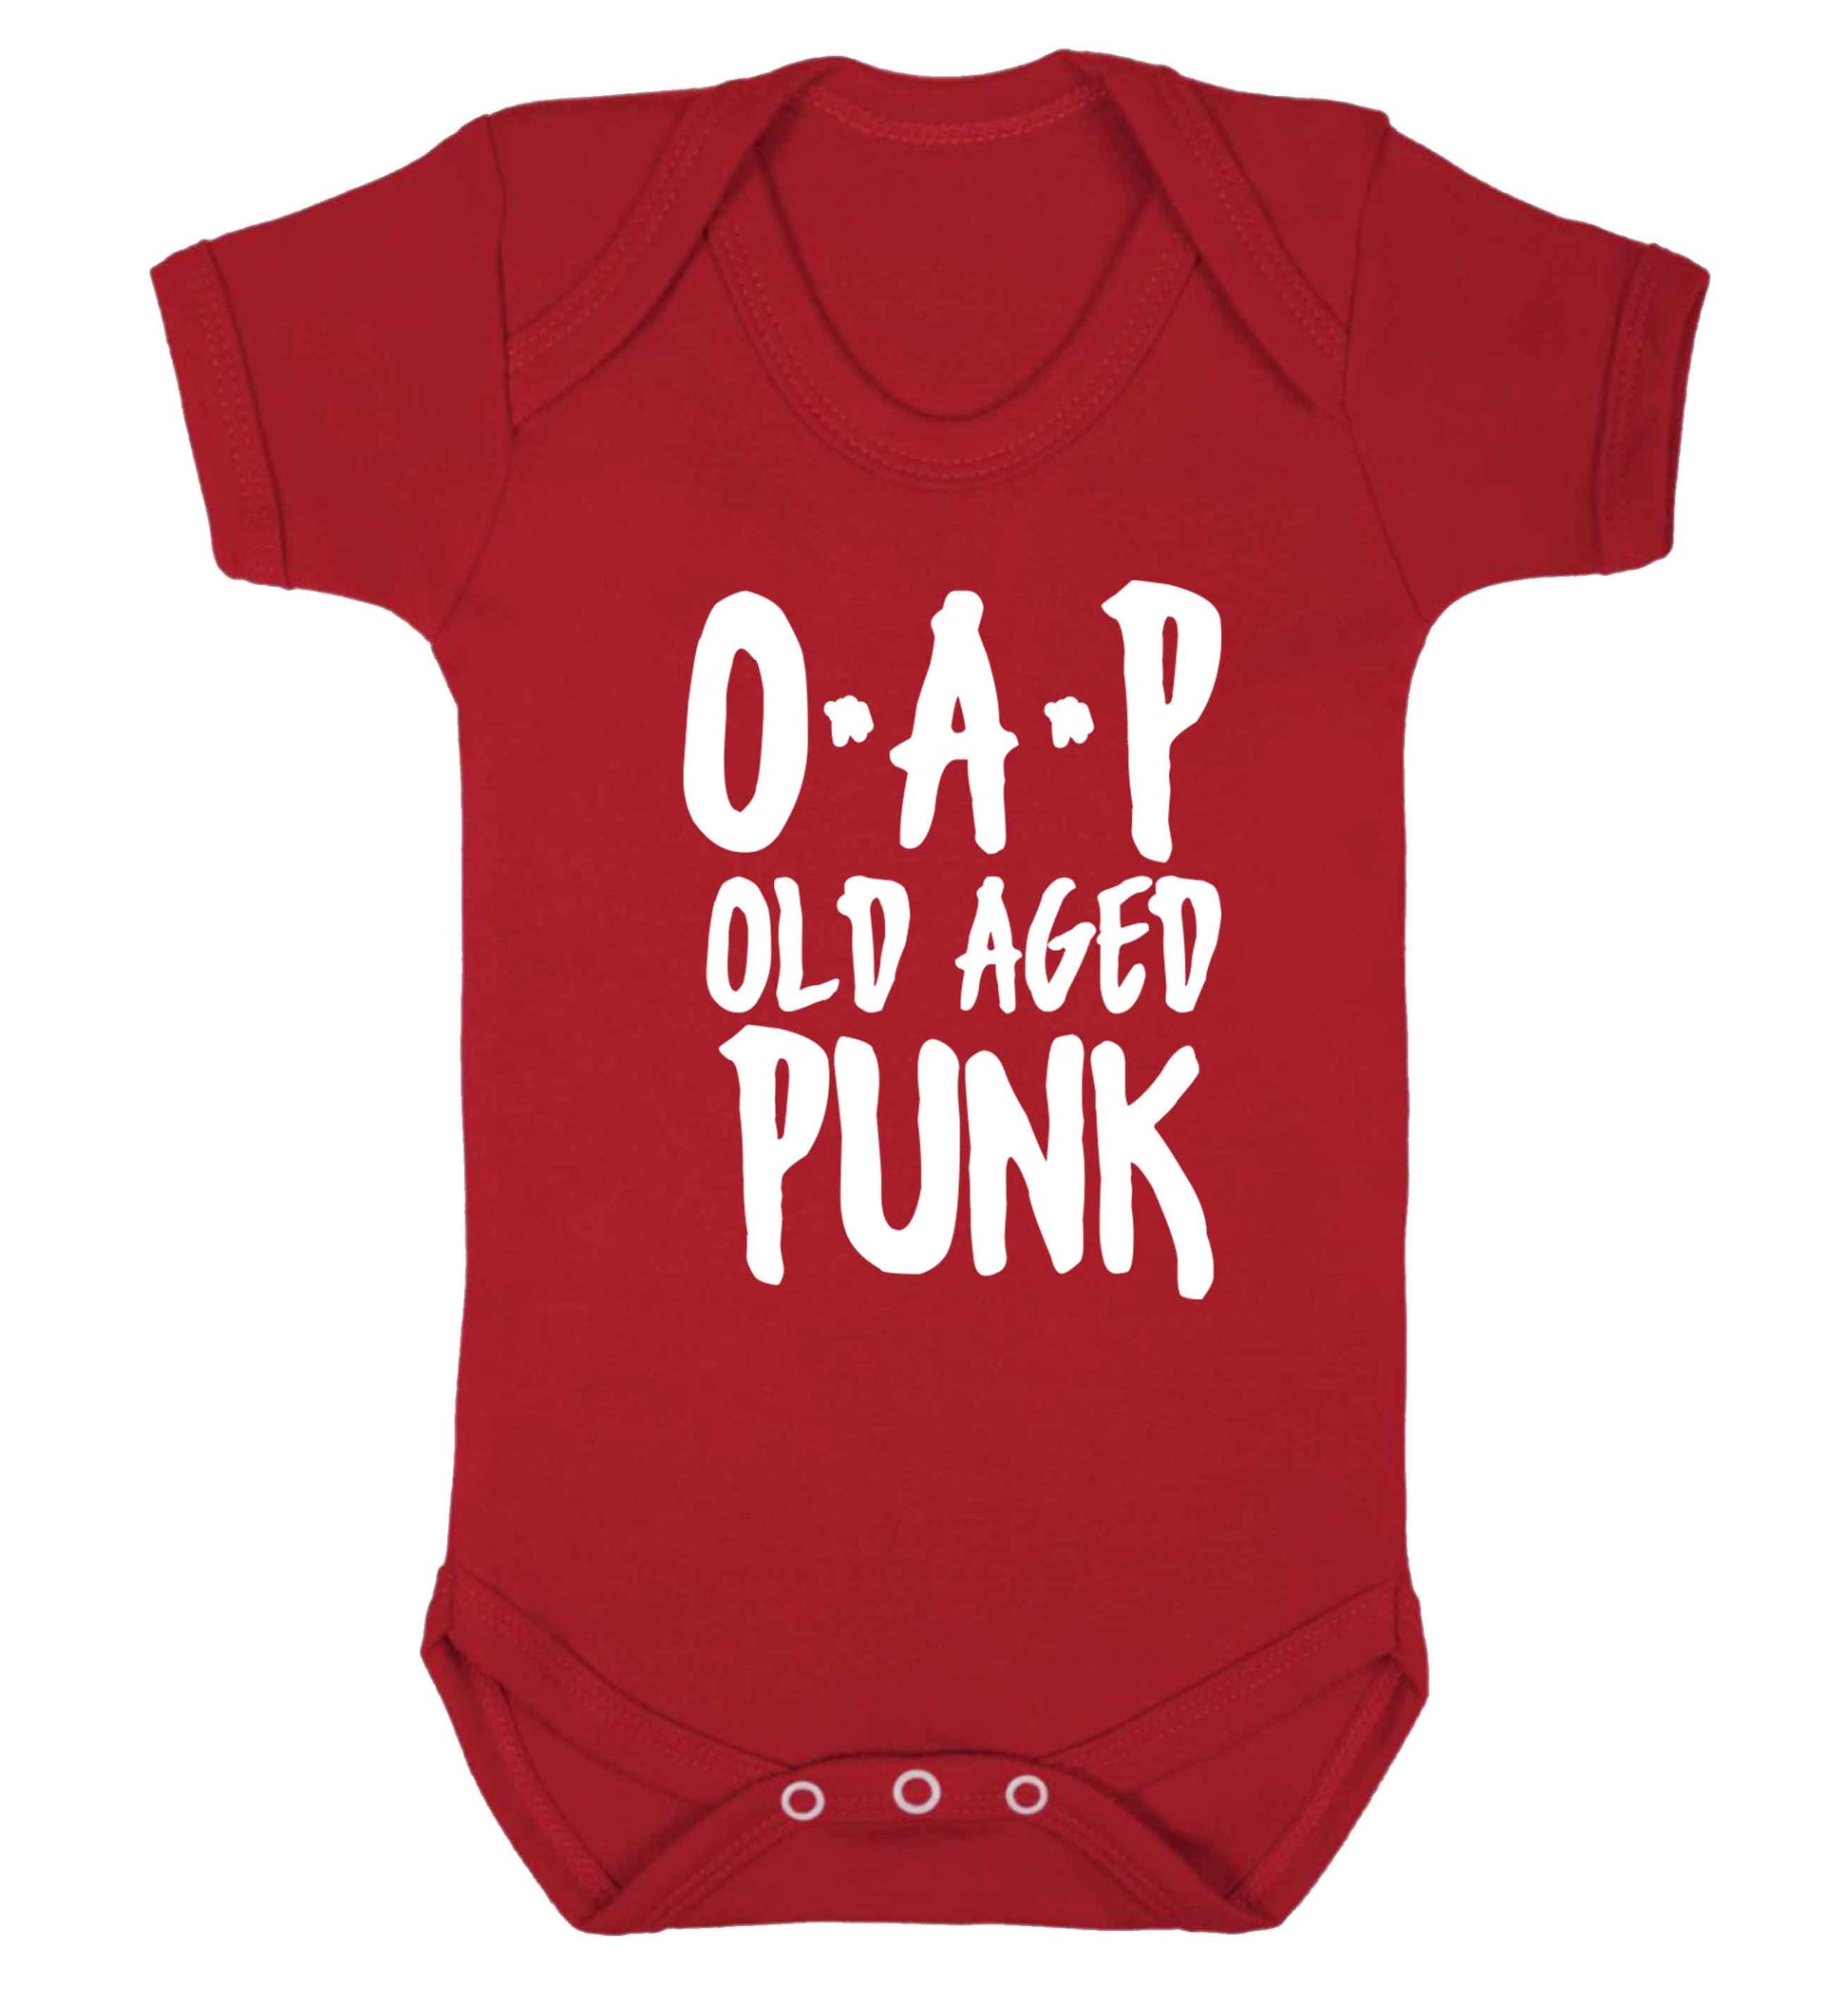 O.A.P Old Age Punk Baby Vest red 18-24 months